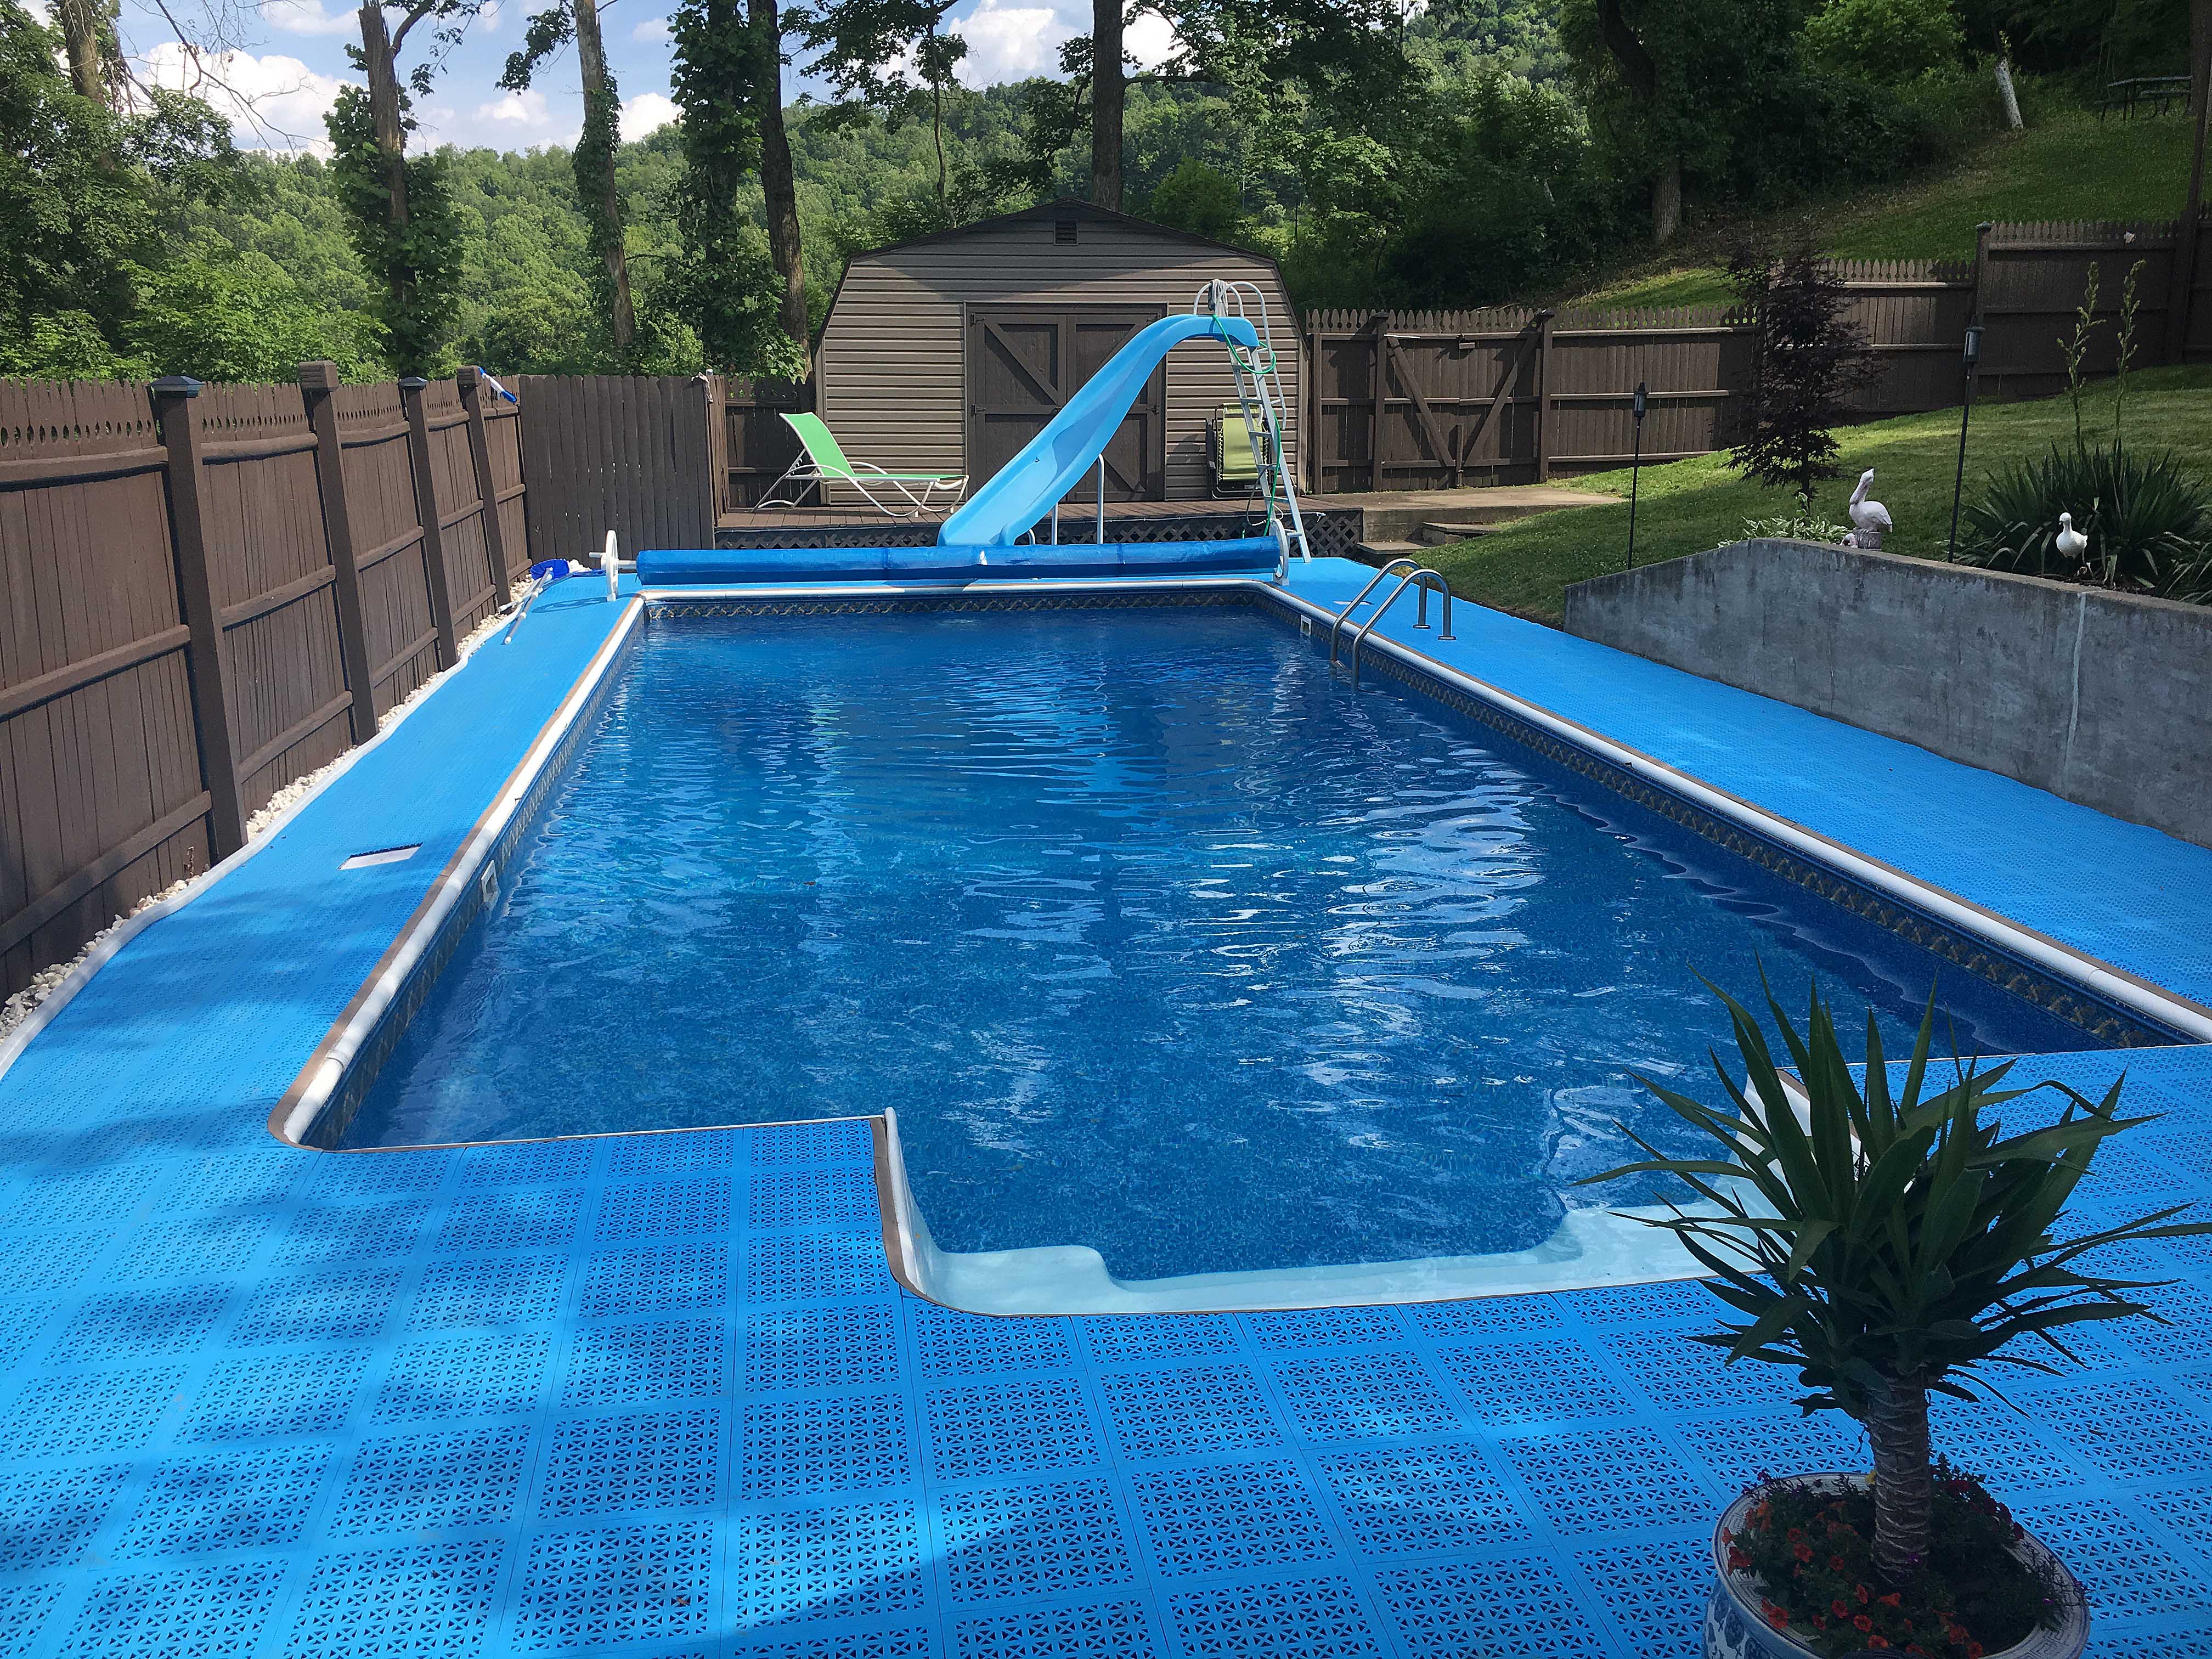 PVC is the best material to use around a pool for DIY installation